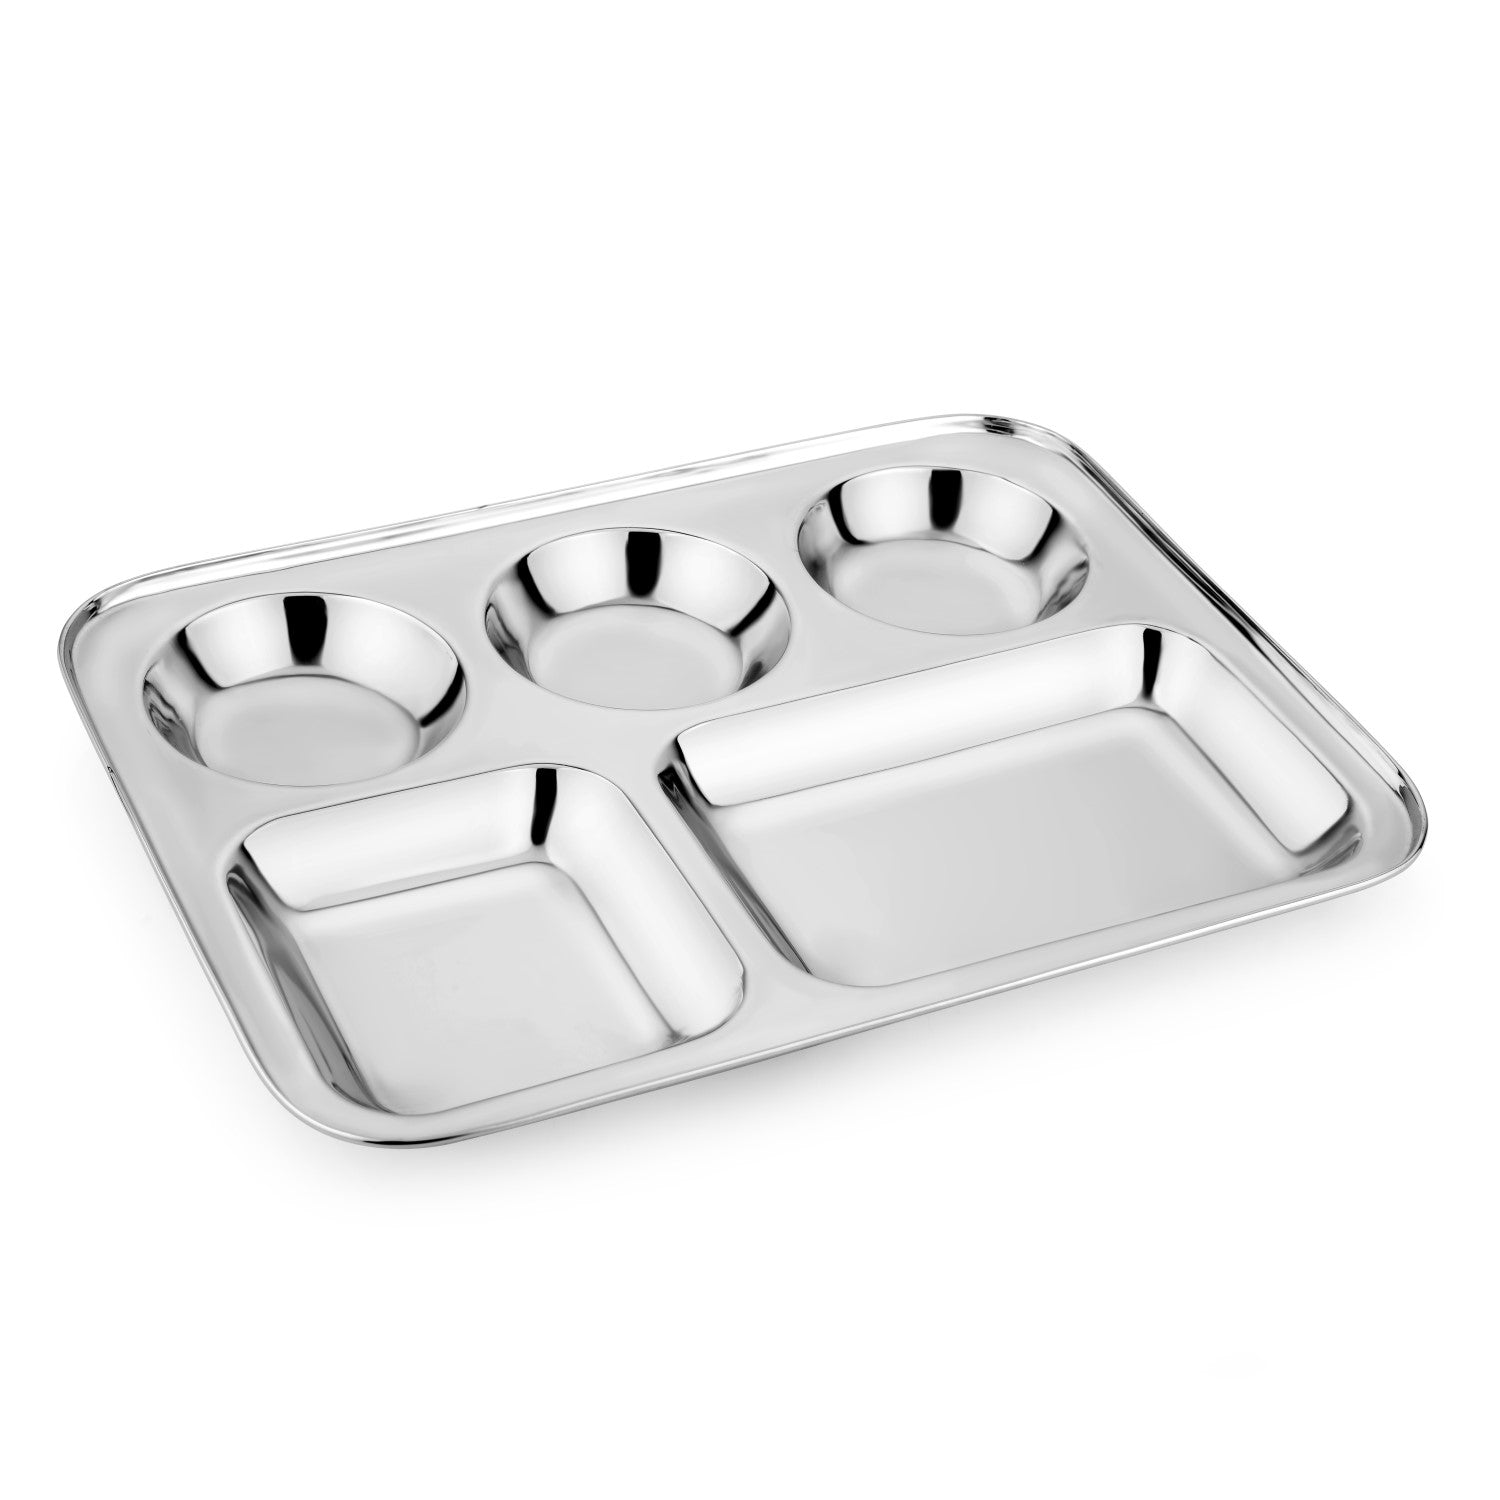 Cafeteria trays built to last, Reusable foodware, restaurant supply, 